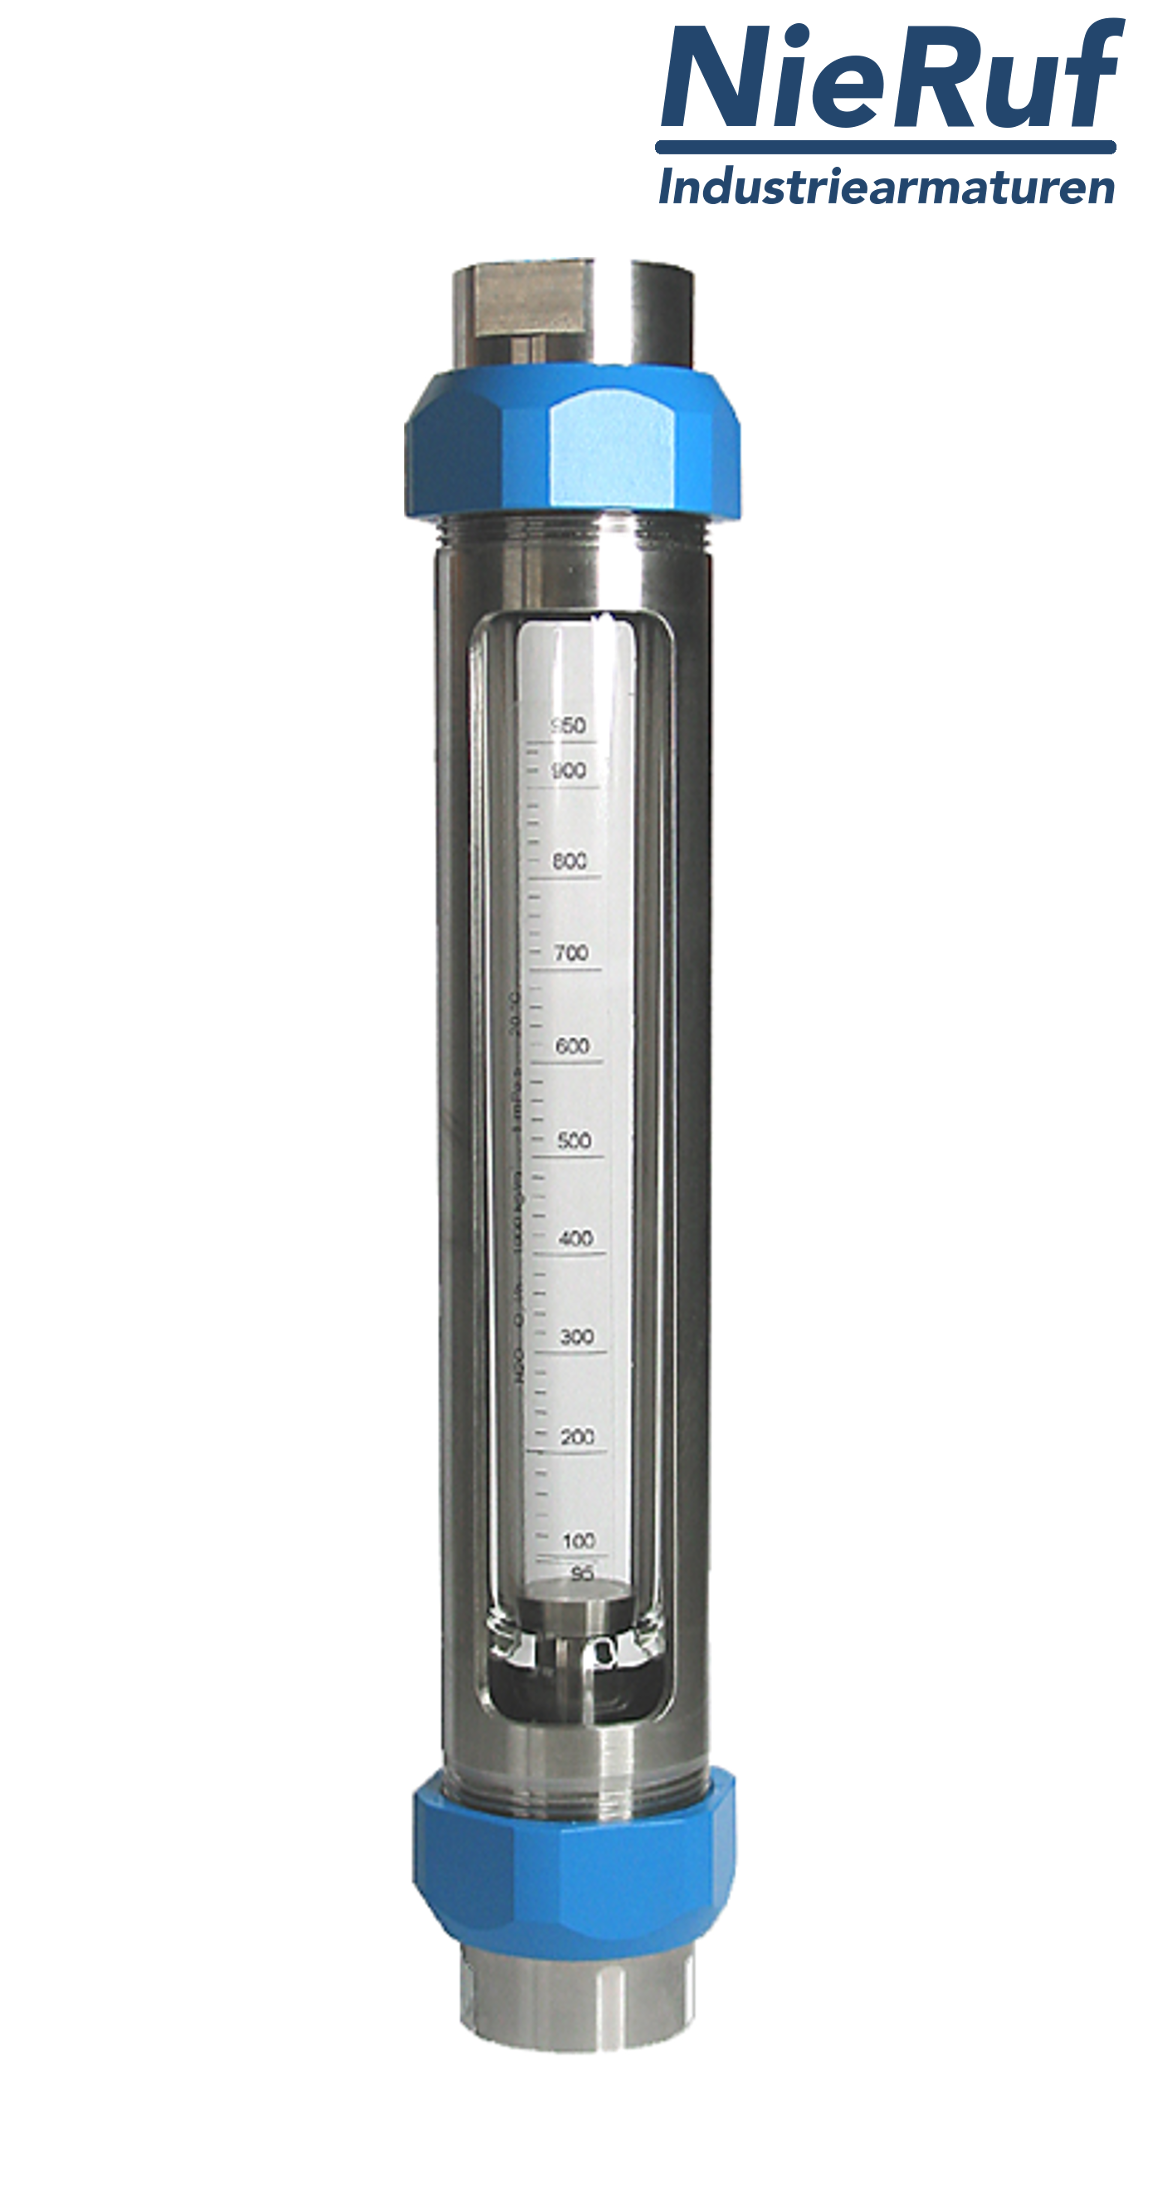 Variable area flowmeter stainless steel + borosilicate 1/2" inch 1600.0 - 16000.0 l/h air FKM